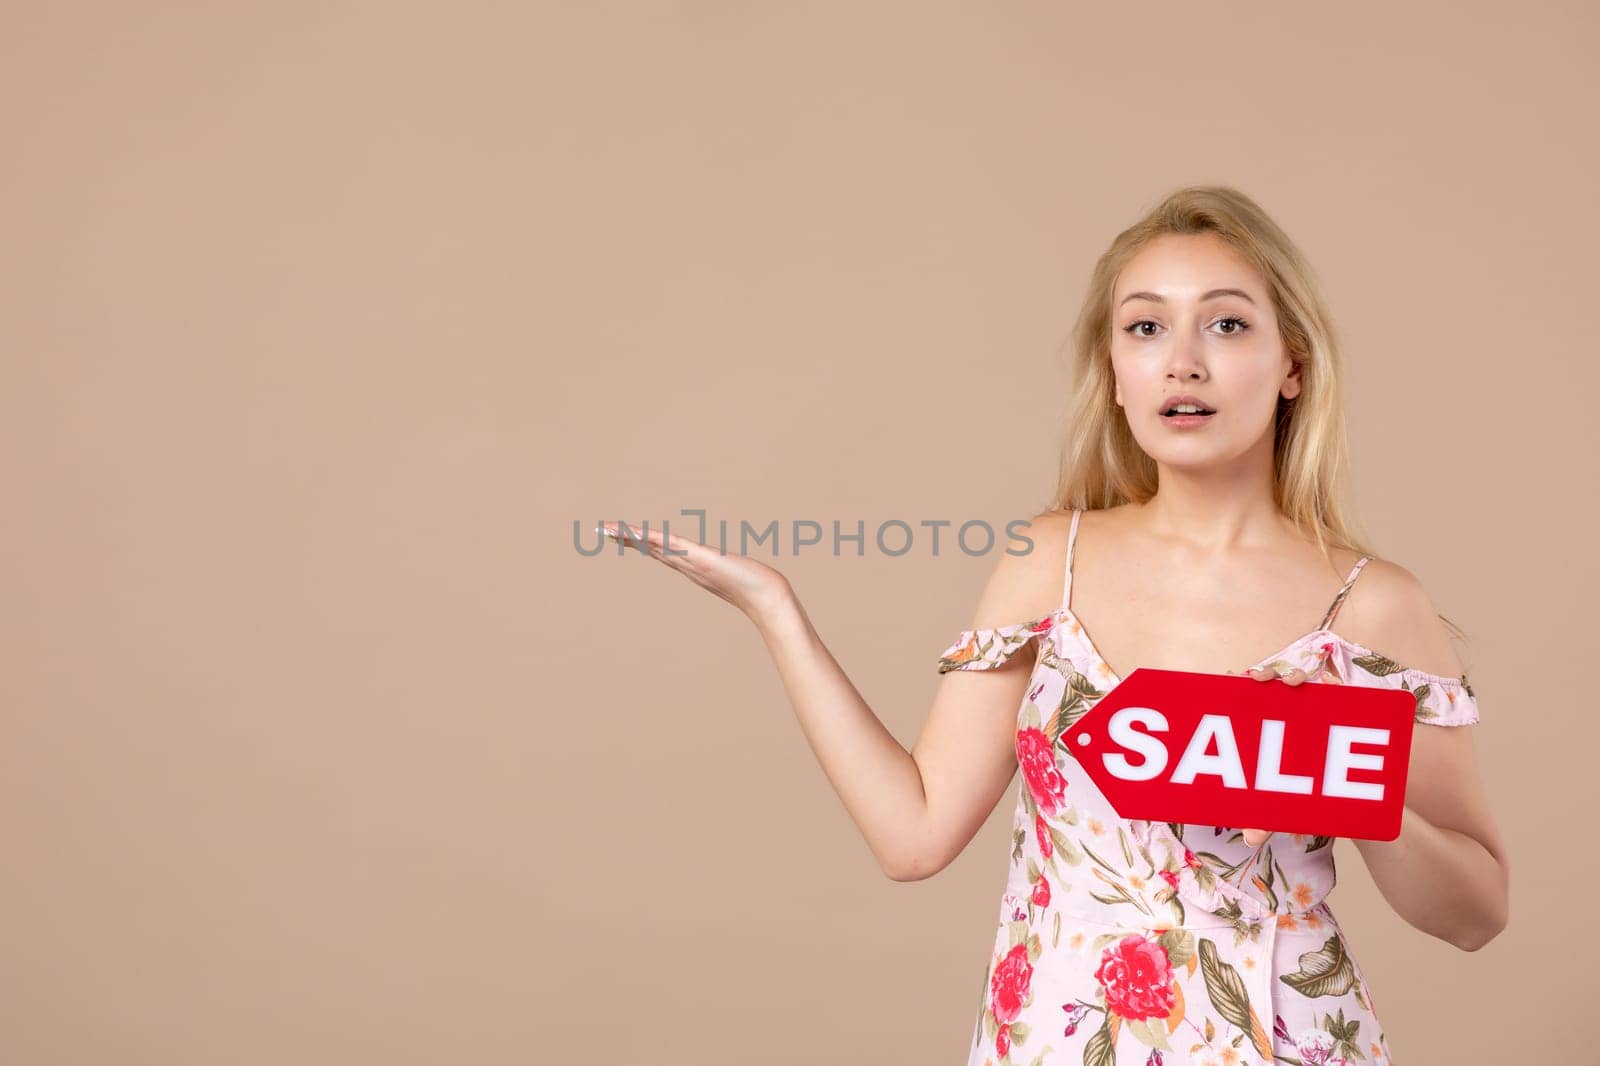 front view young female holding red sale nameplate on brown background money march horizontal sensual shopping woman equality feminine by Kamran